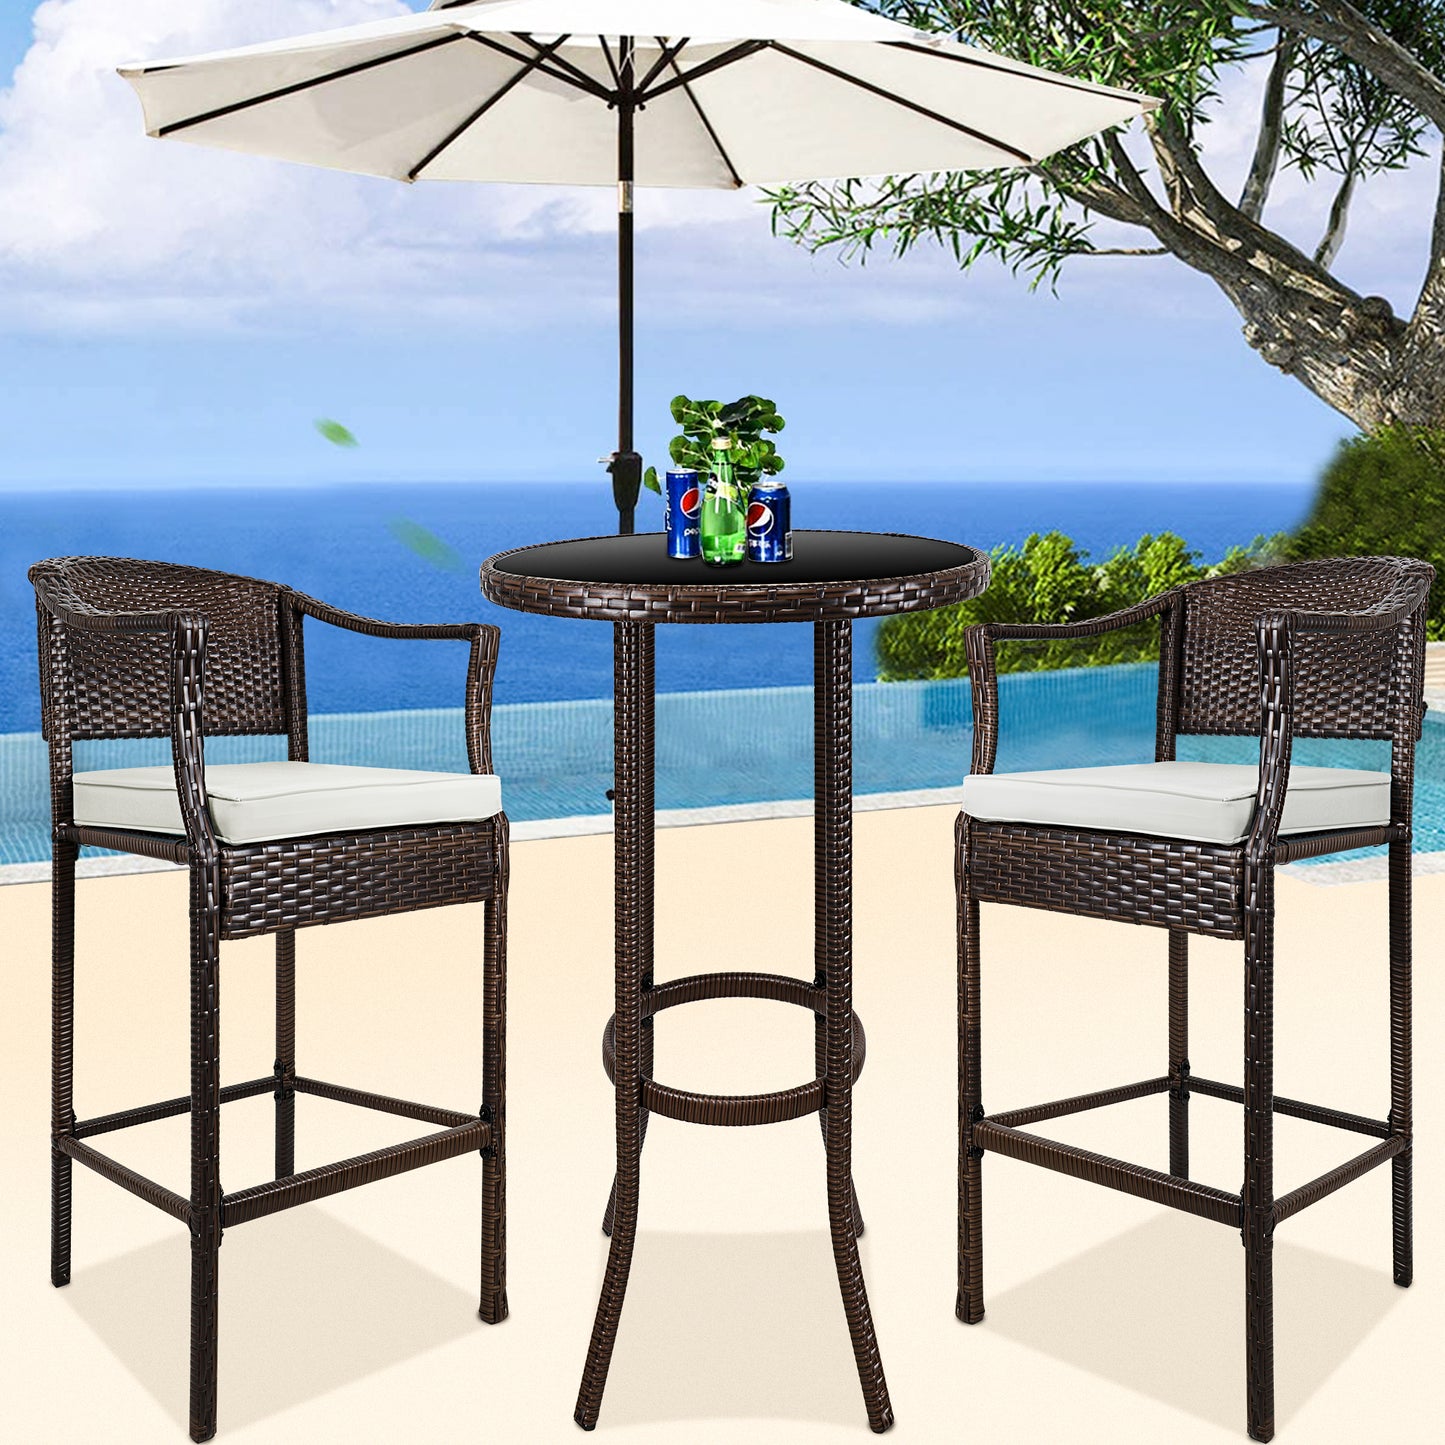 Clearance! 3 Piece Pub Table Set, High Top Bar Table W/ 2 Chairs Padded Seat, PE Rattan Height Bar Stools Set of 3, All-Weather Dining Table Set for Kitchen Home Pub Cafe Outdoor Patio Poolside, B101